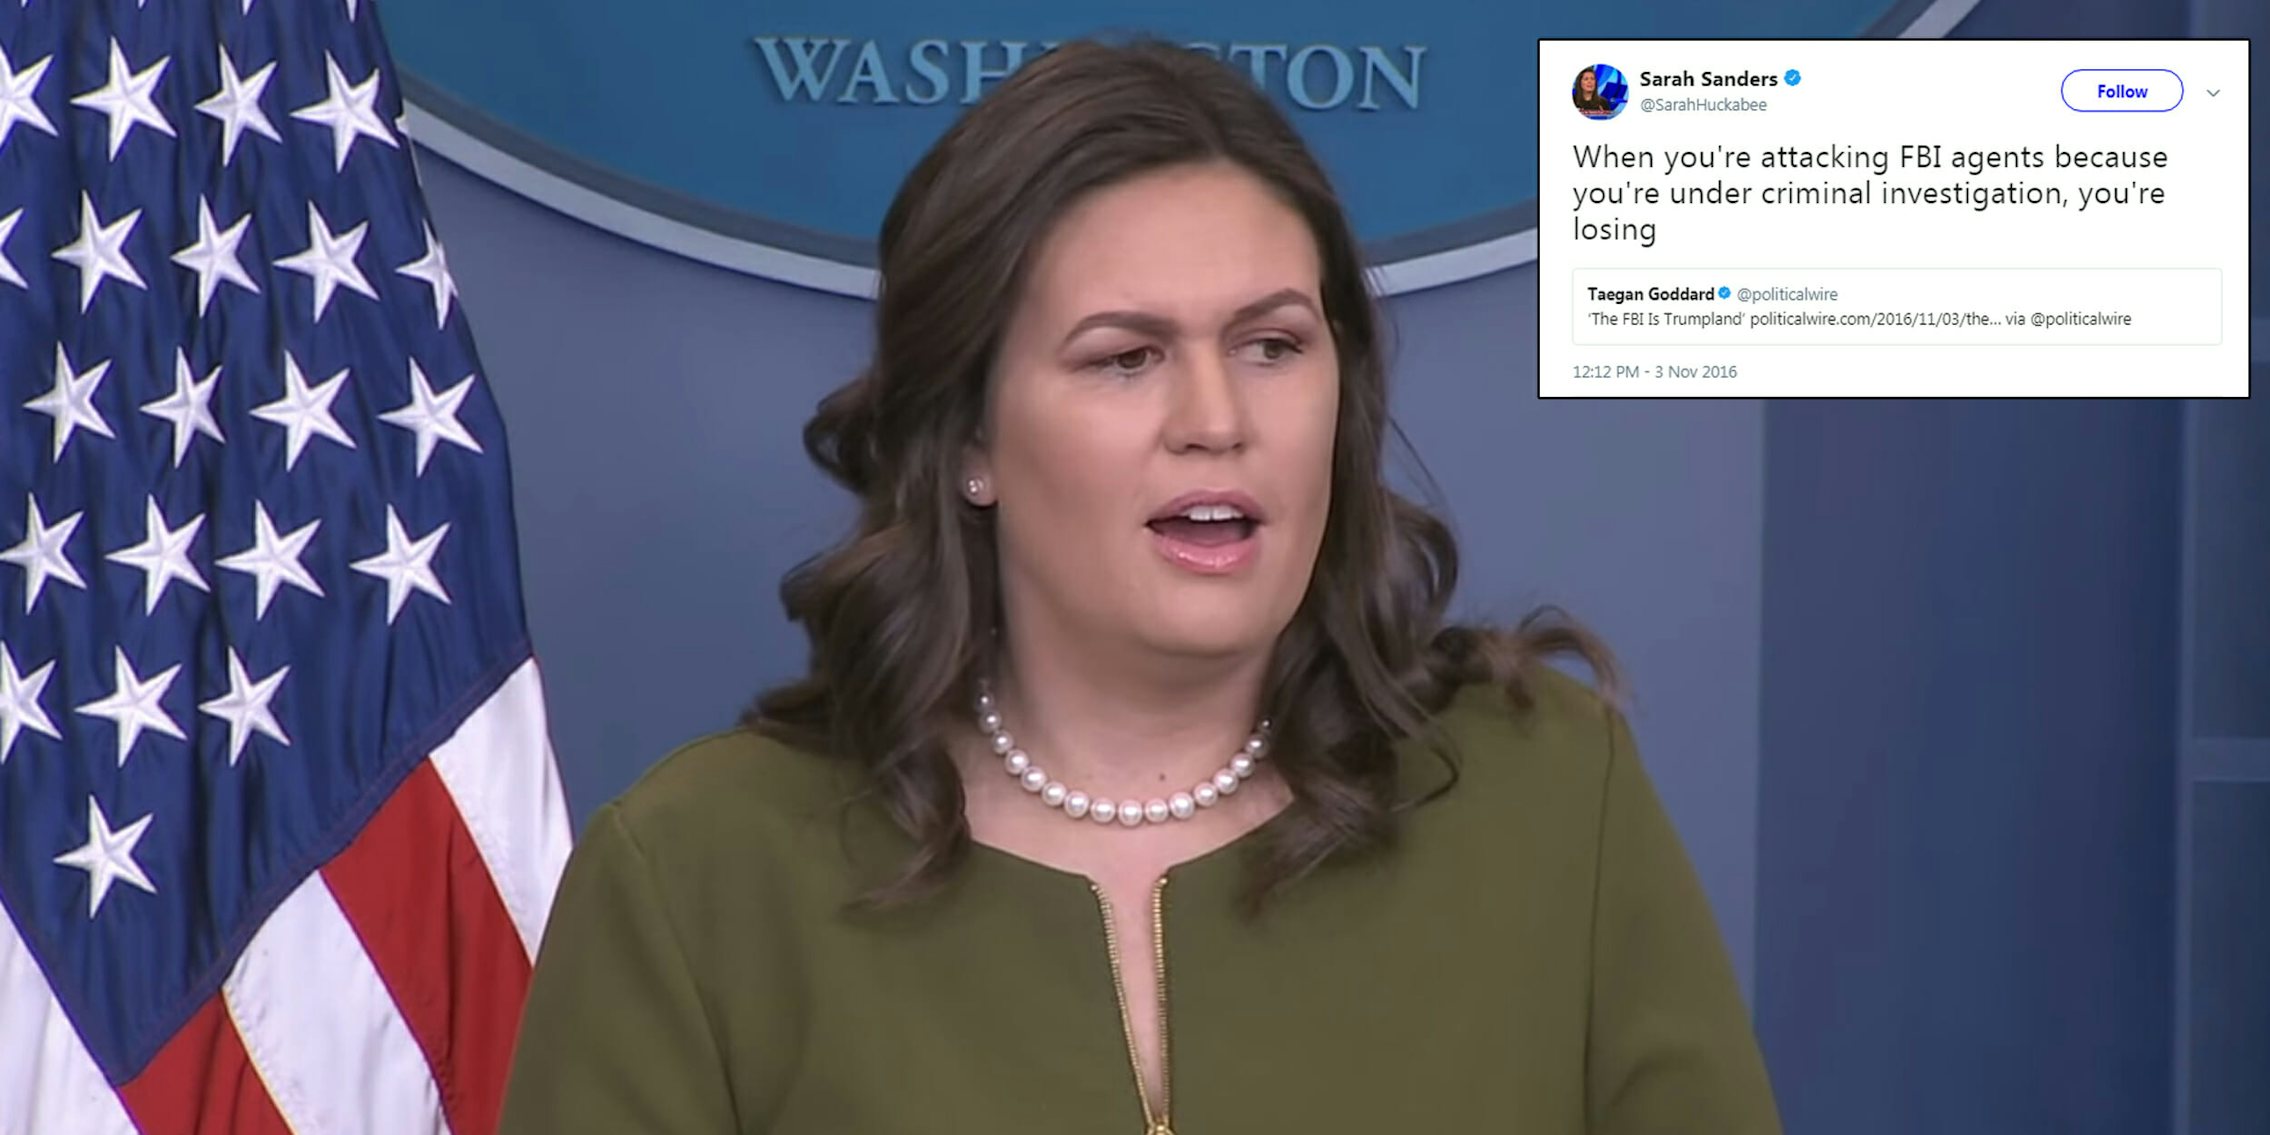 A tweet from Sarah Huckabee Sanders last year has a bit of a different meaning after President Donald Trump blasted the FBI on Twitter over the weekend.